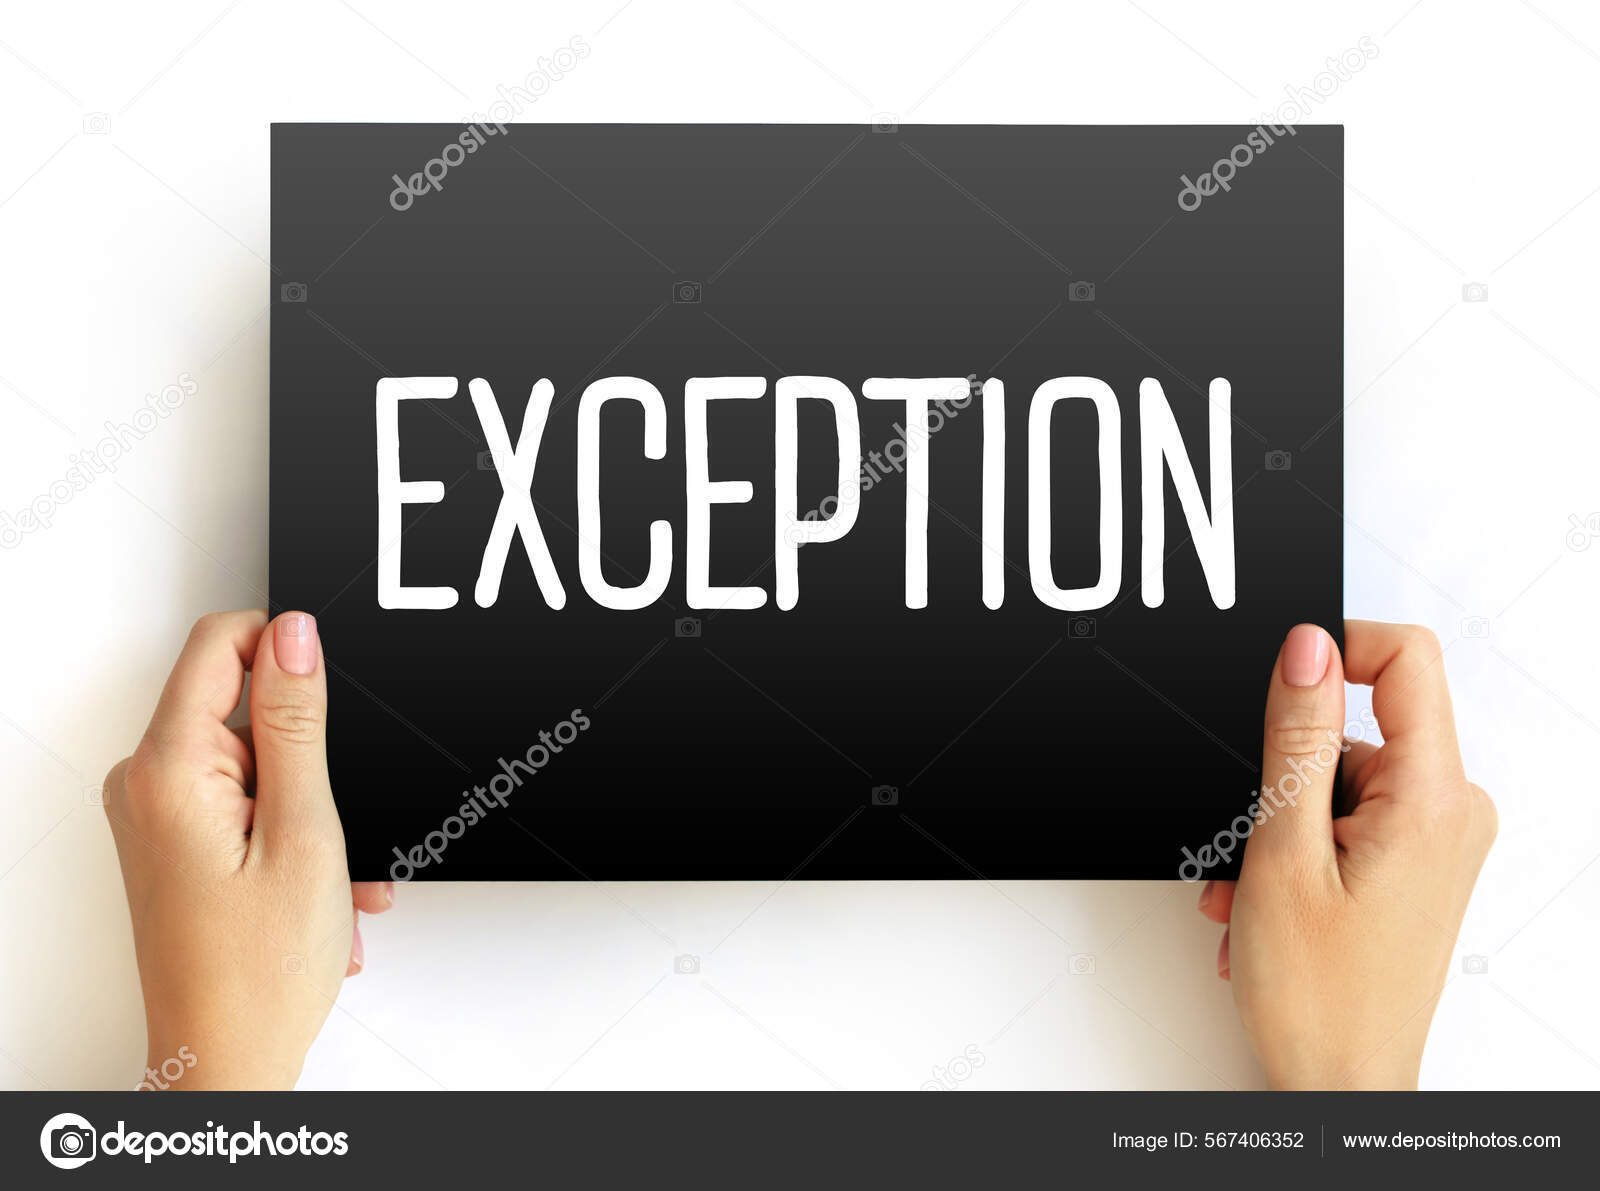 Exception Text Card Concept Background Stock Photo by ©dizain 567406352